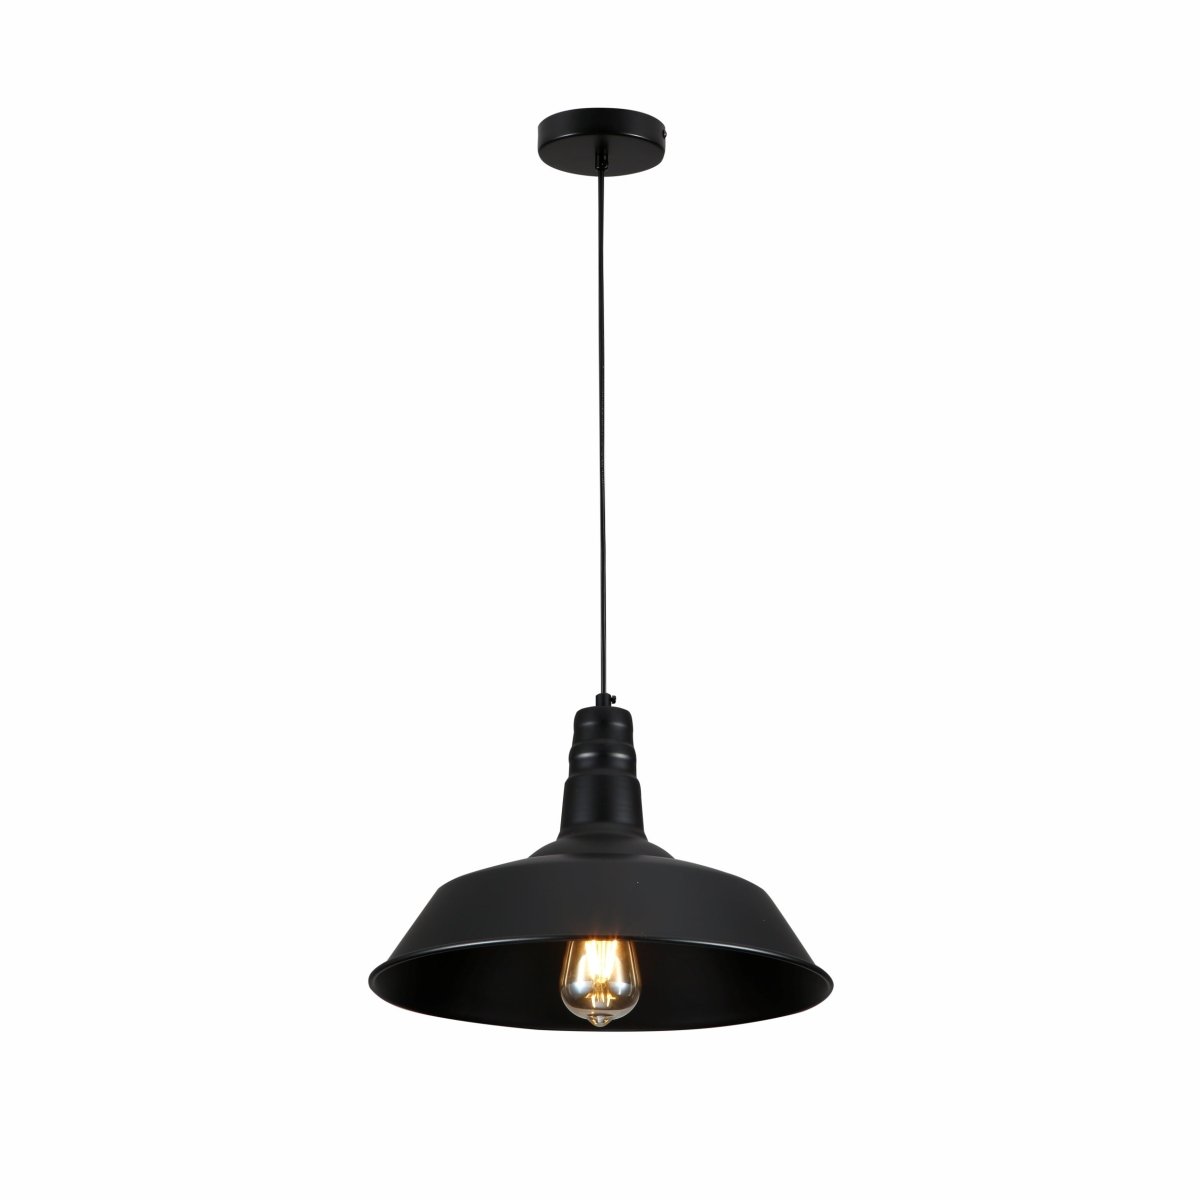 Main image of Black Step Industrial Metal Ceiling Pendant Light with E27 Fitting | TEKLED 150-18358